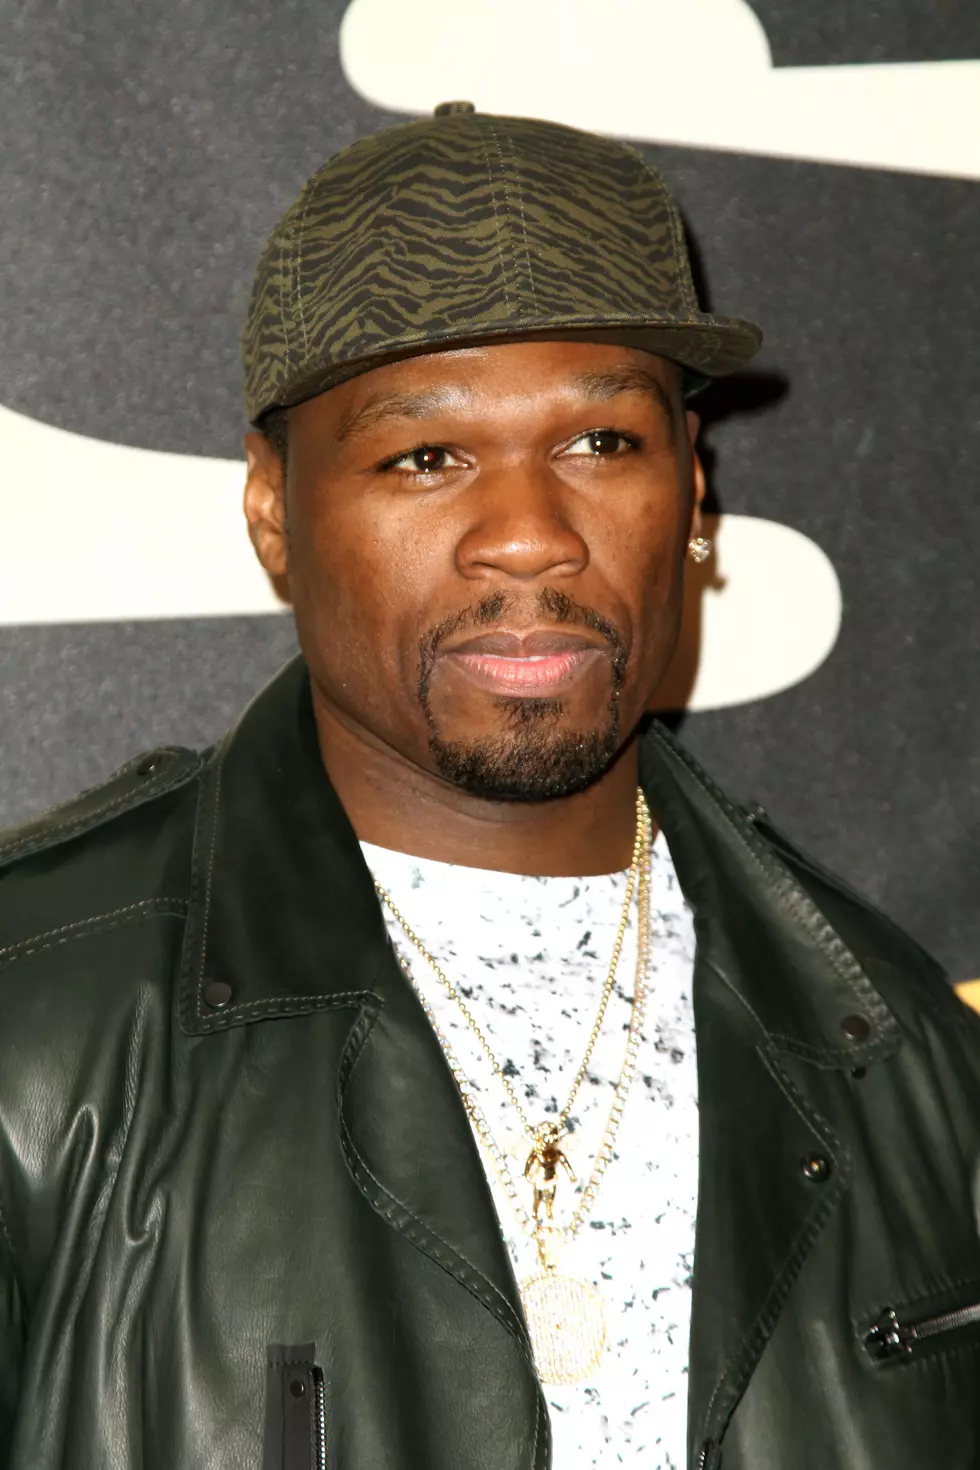 50 Cent Claims He Was Racially Profiled!